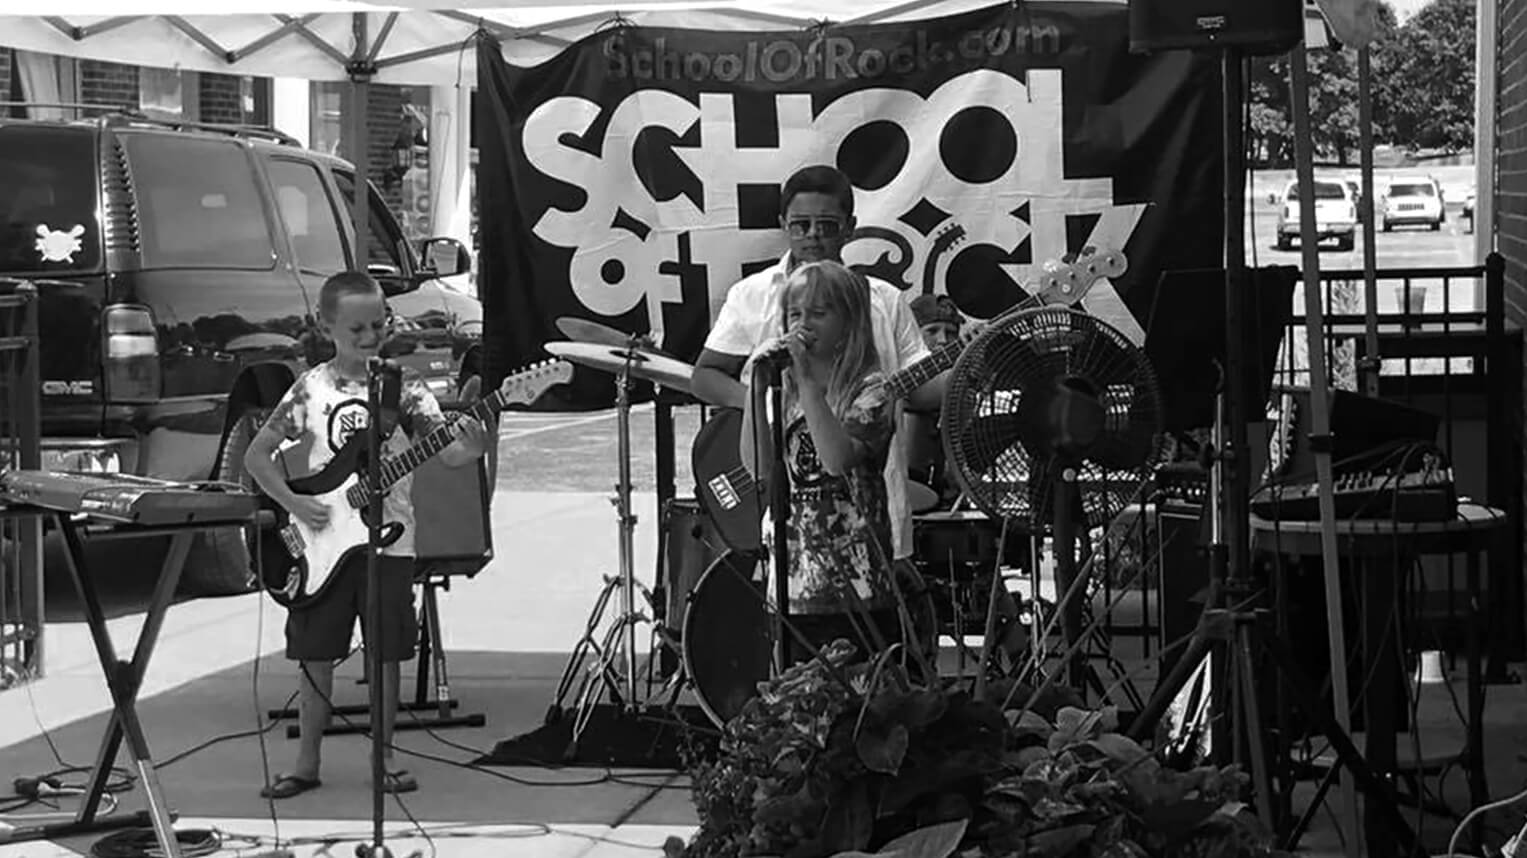 Local Spring Music Workshops at School of Rock